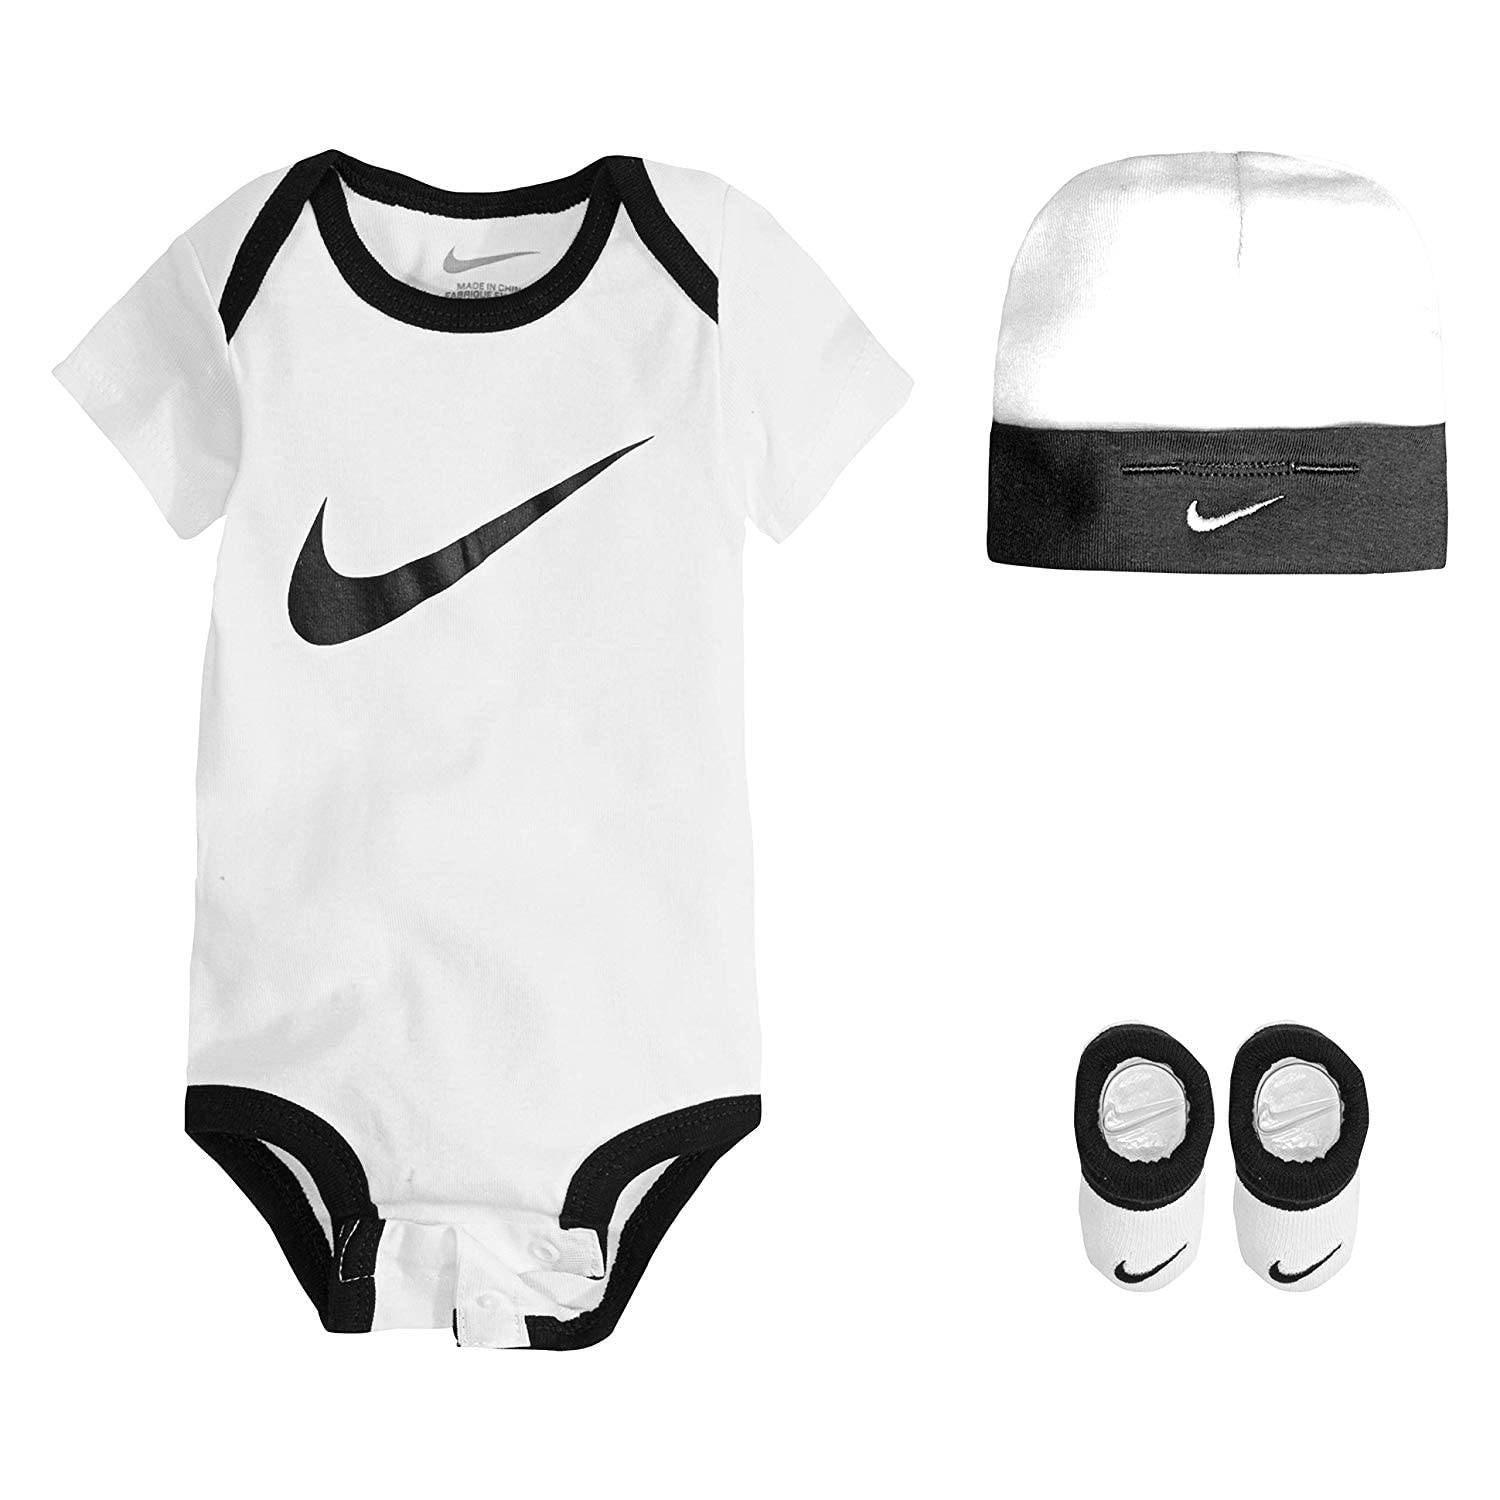 [LN0072-001] Baby Nike Bodysuit, Hat and Booties 3-PC Box Set